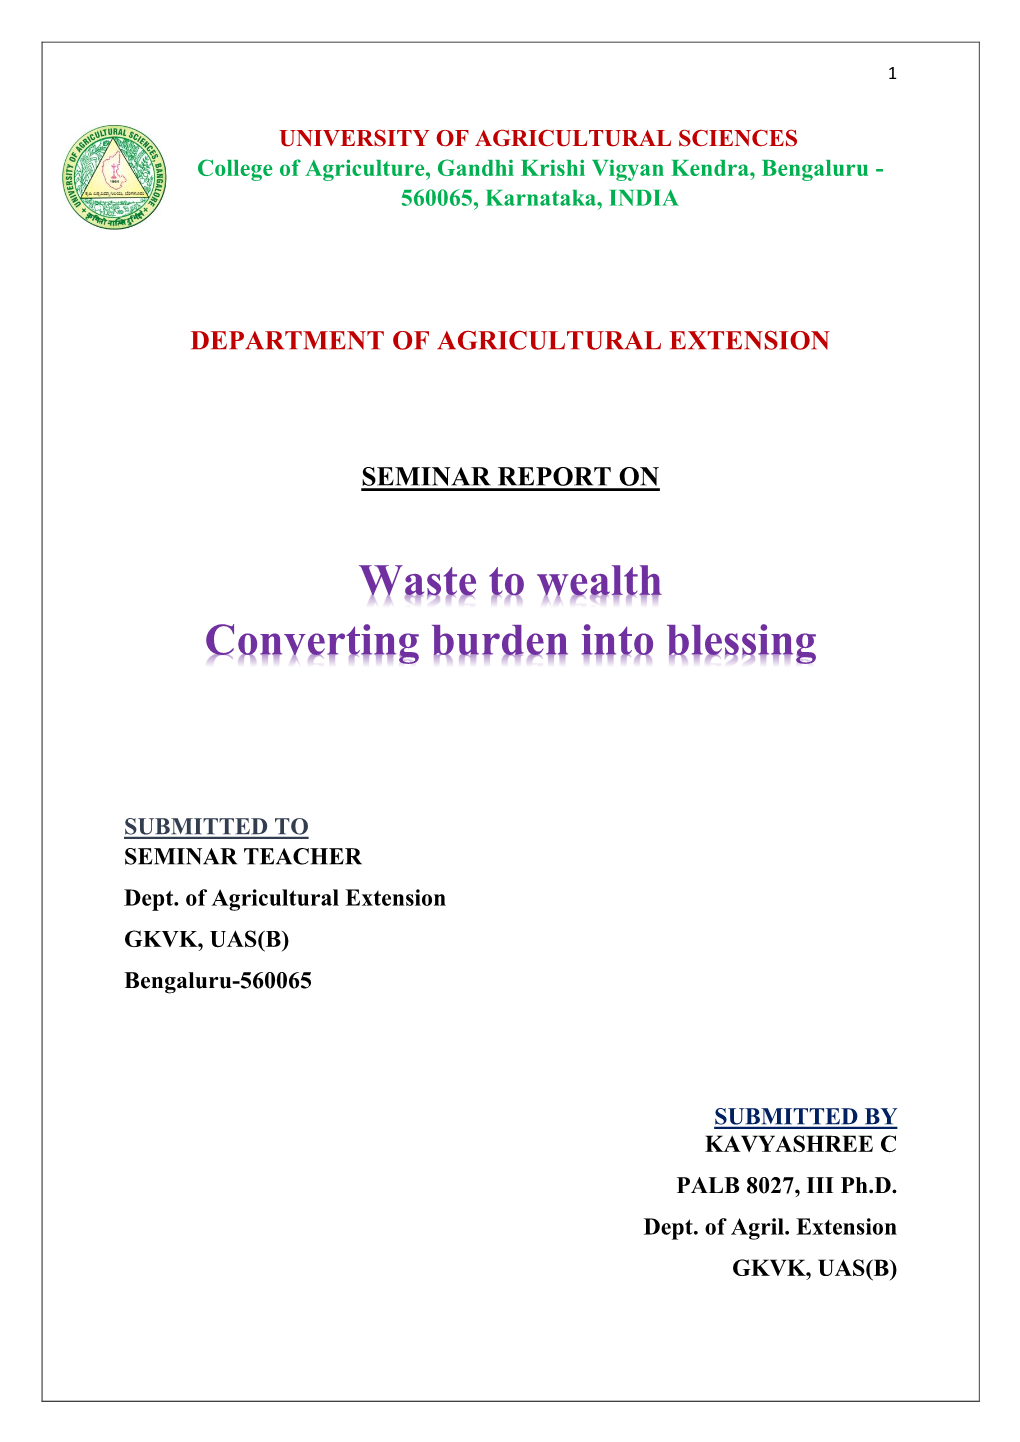 Waste to Wealth Converting Burden Into Blessing